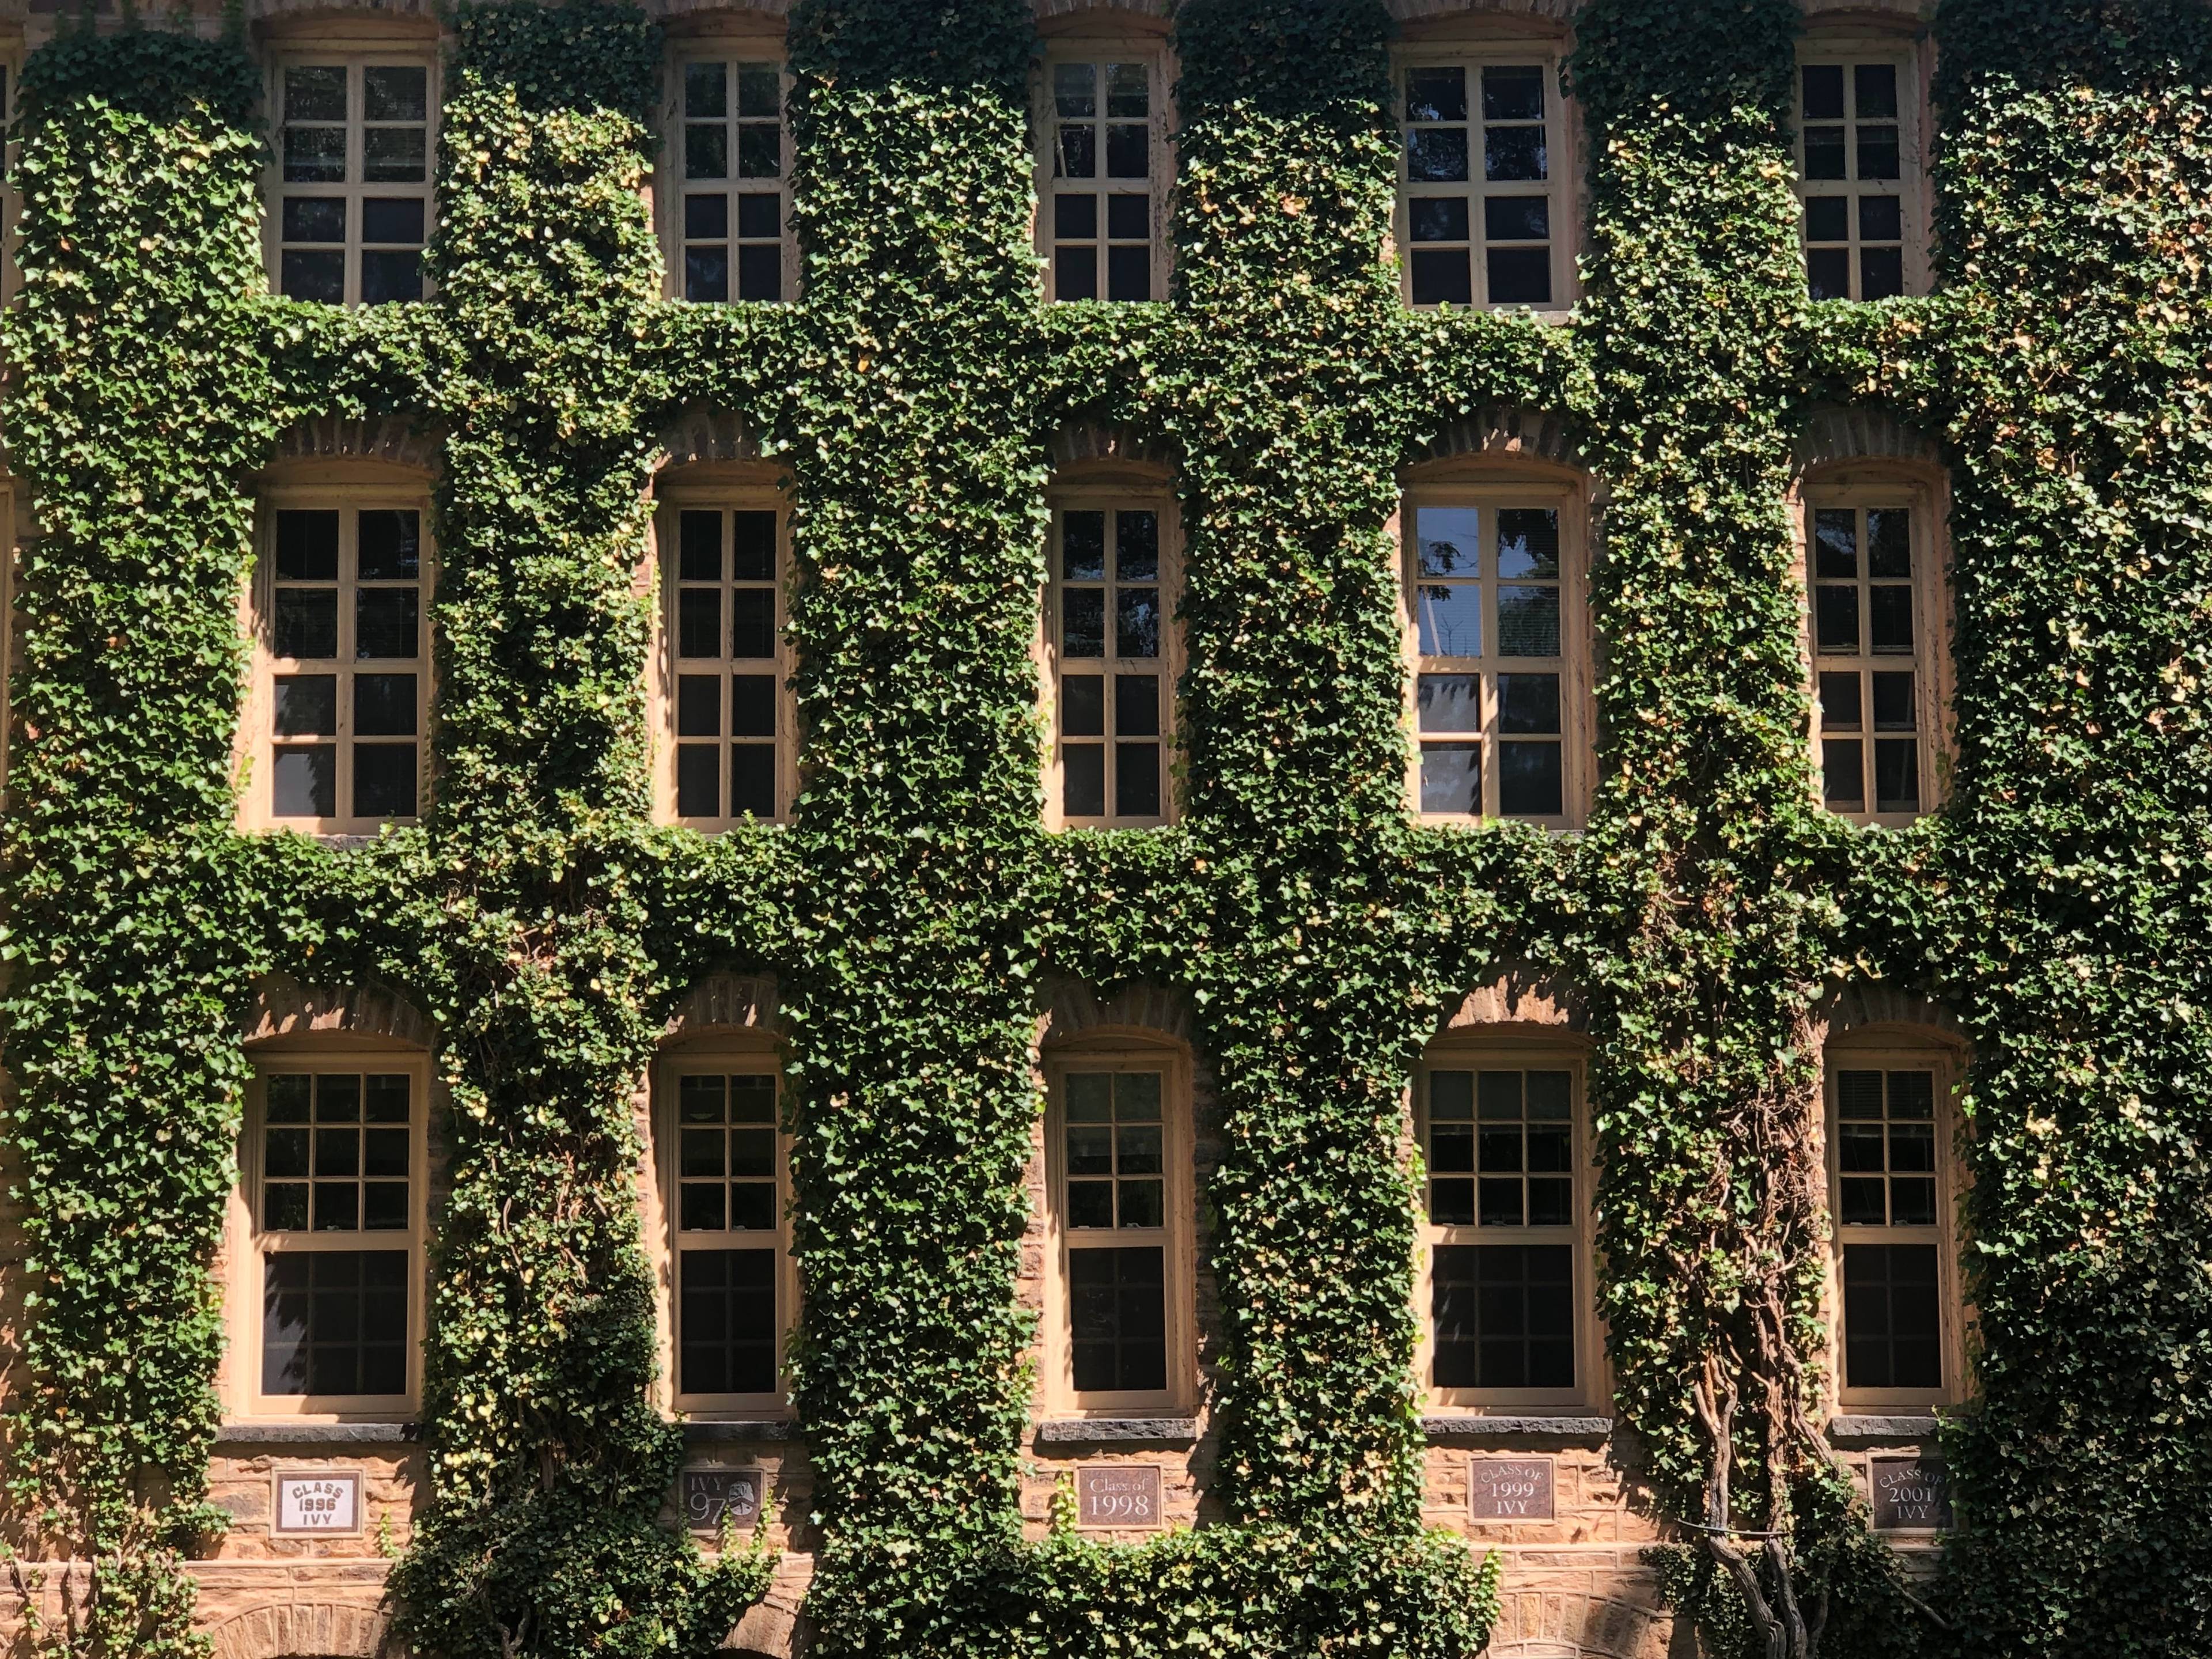 princeton covered in ivy